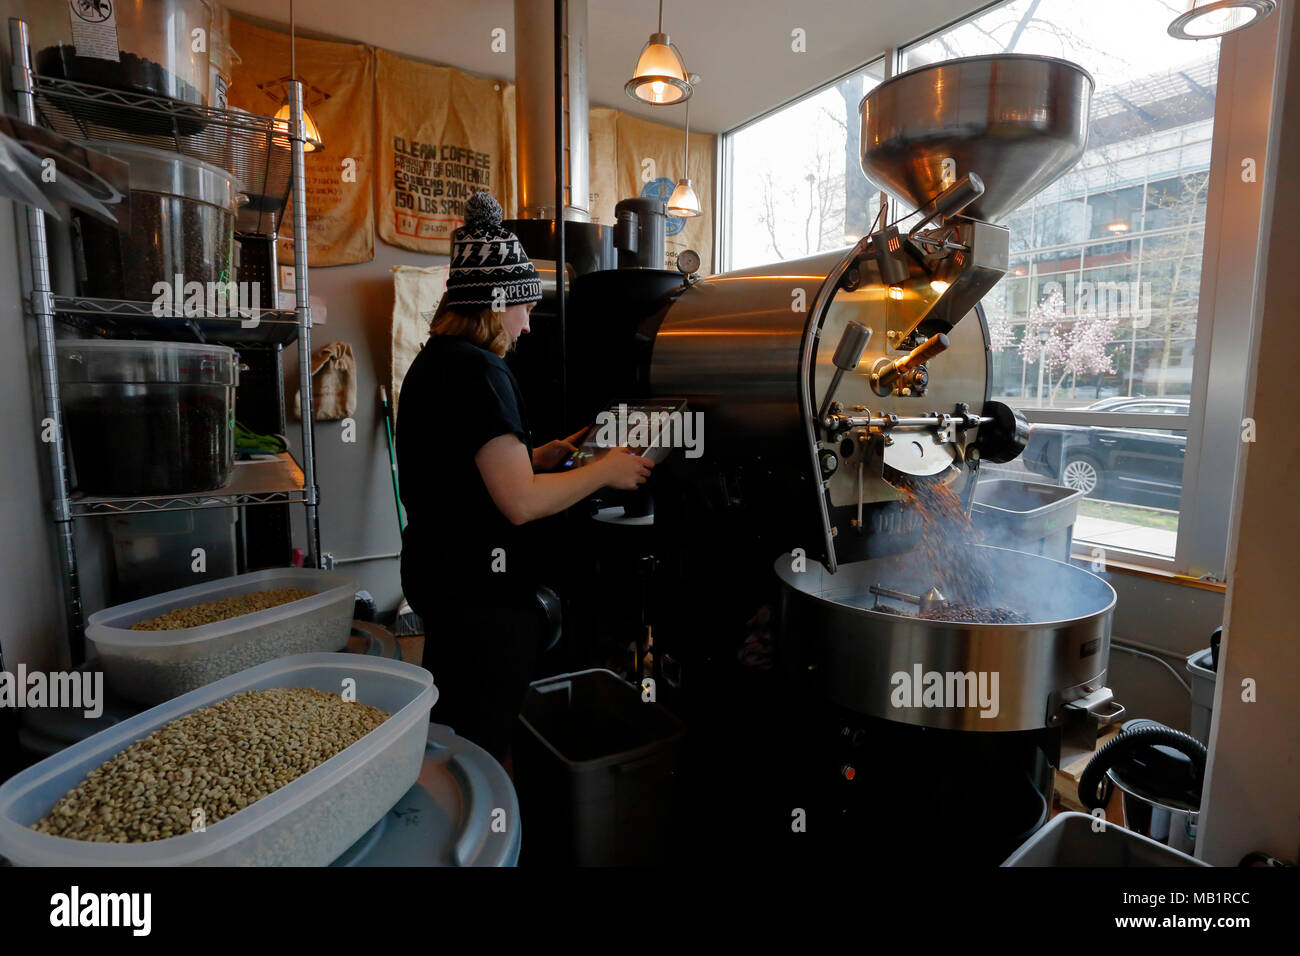 A person operates a Diedrich IR5 coffee roasting machine with freshly roasted coffee beans pouring out, River Trail Roasters, Redmond, Washington. Stock Photo